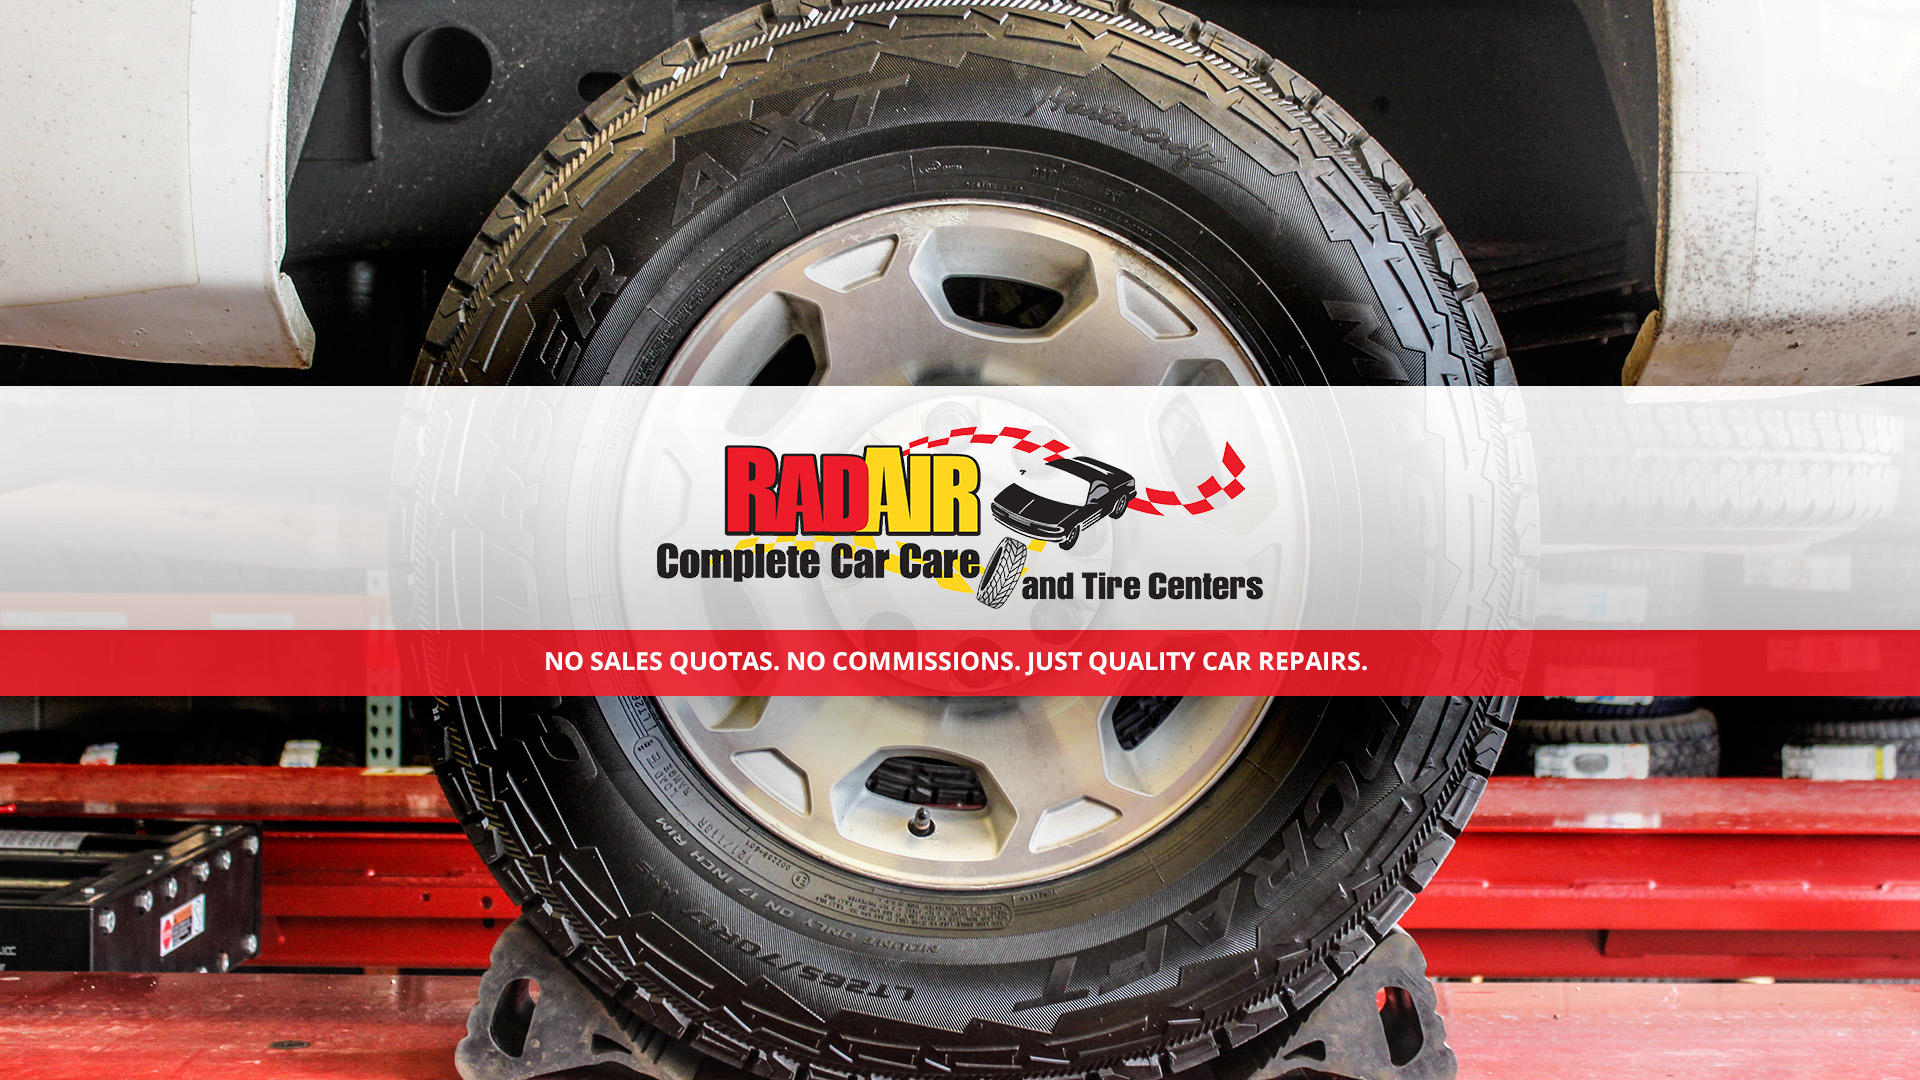 Rad Air Complete Car Care and Tire Center - Fairlawn